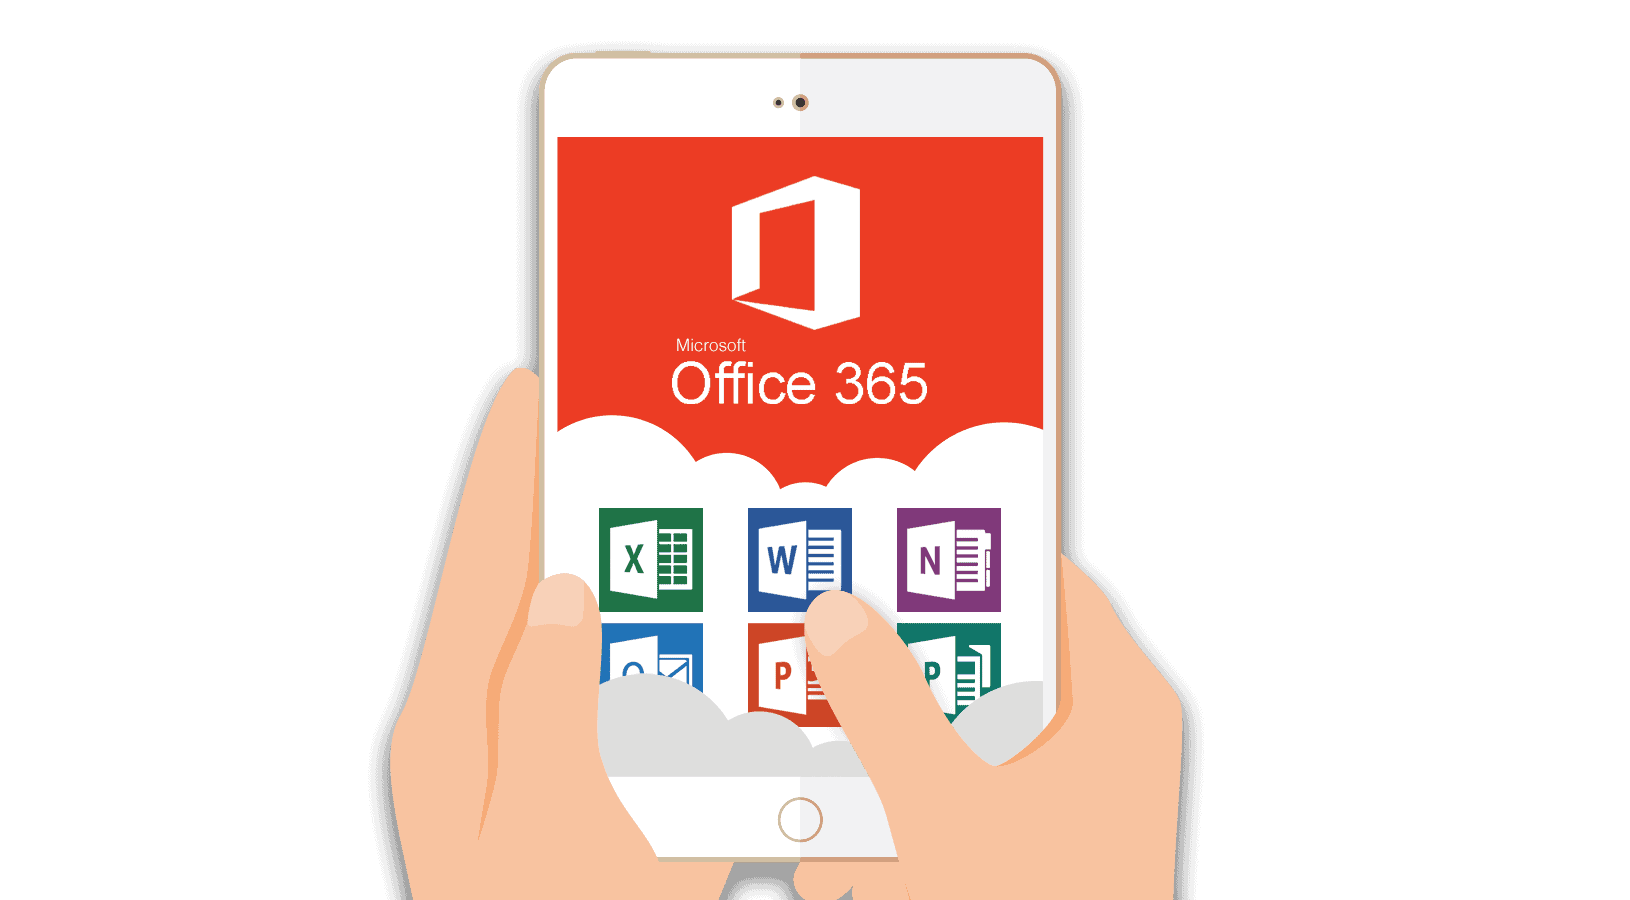 Online Resources to Discover and Learn about Office 365 | Smartdesc